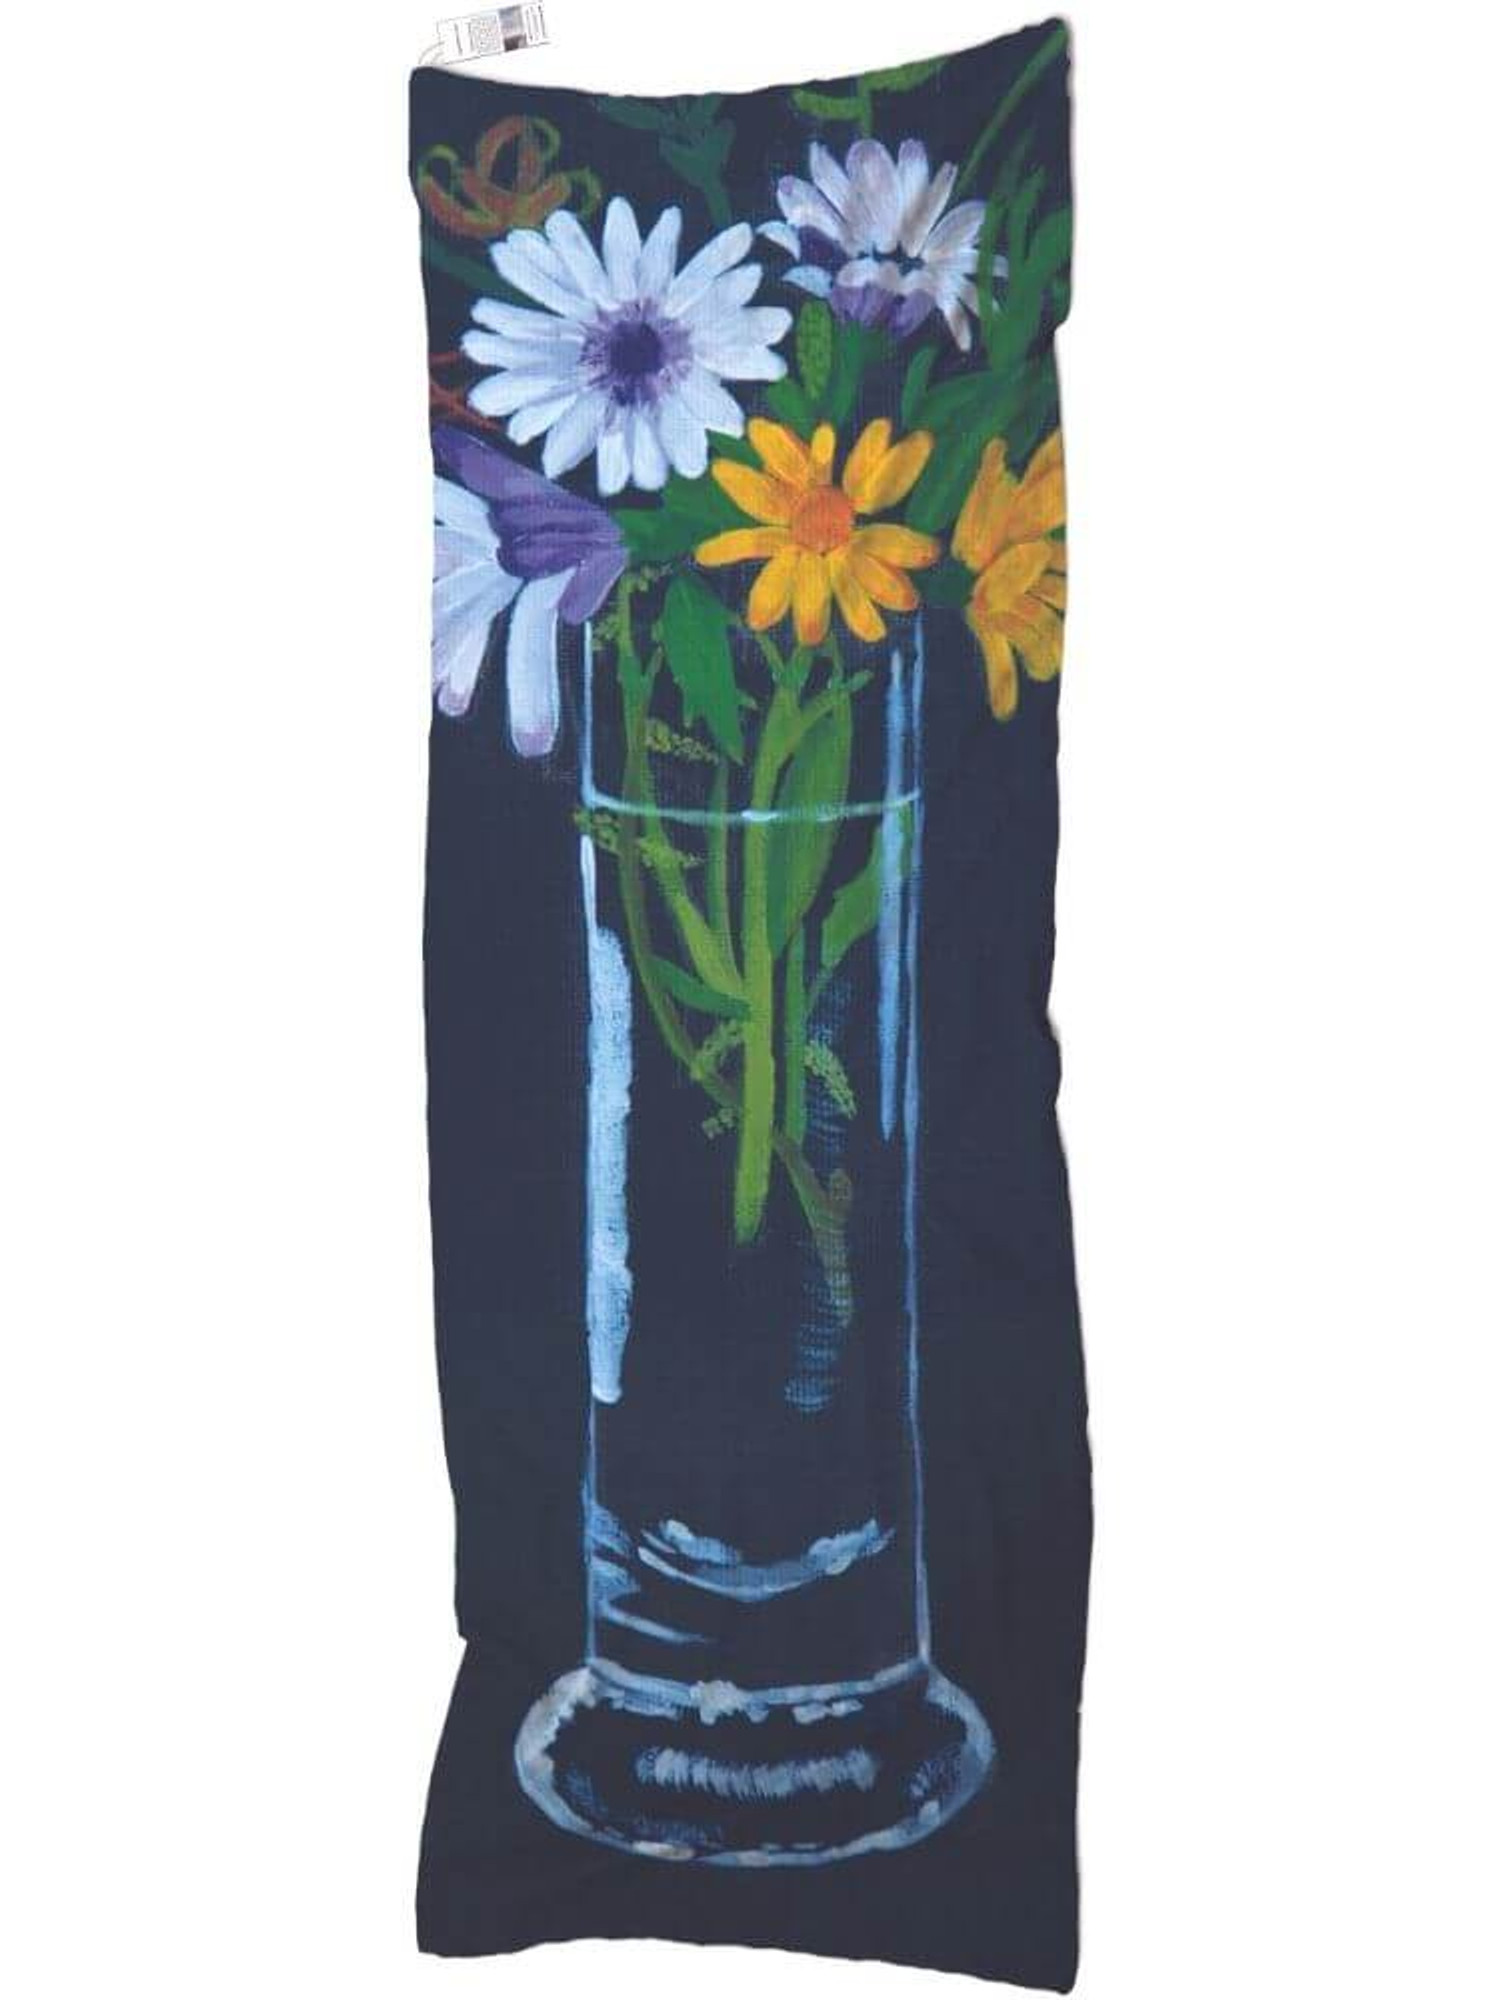 full length Daisy and I Modal Scarf by the artists label Jessica Ramsay 200x70cm